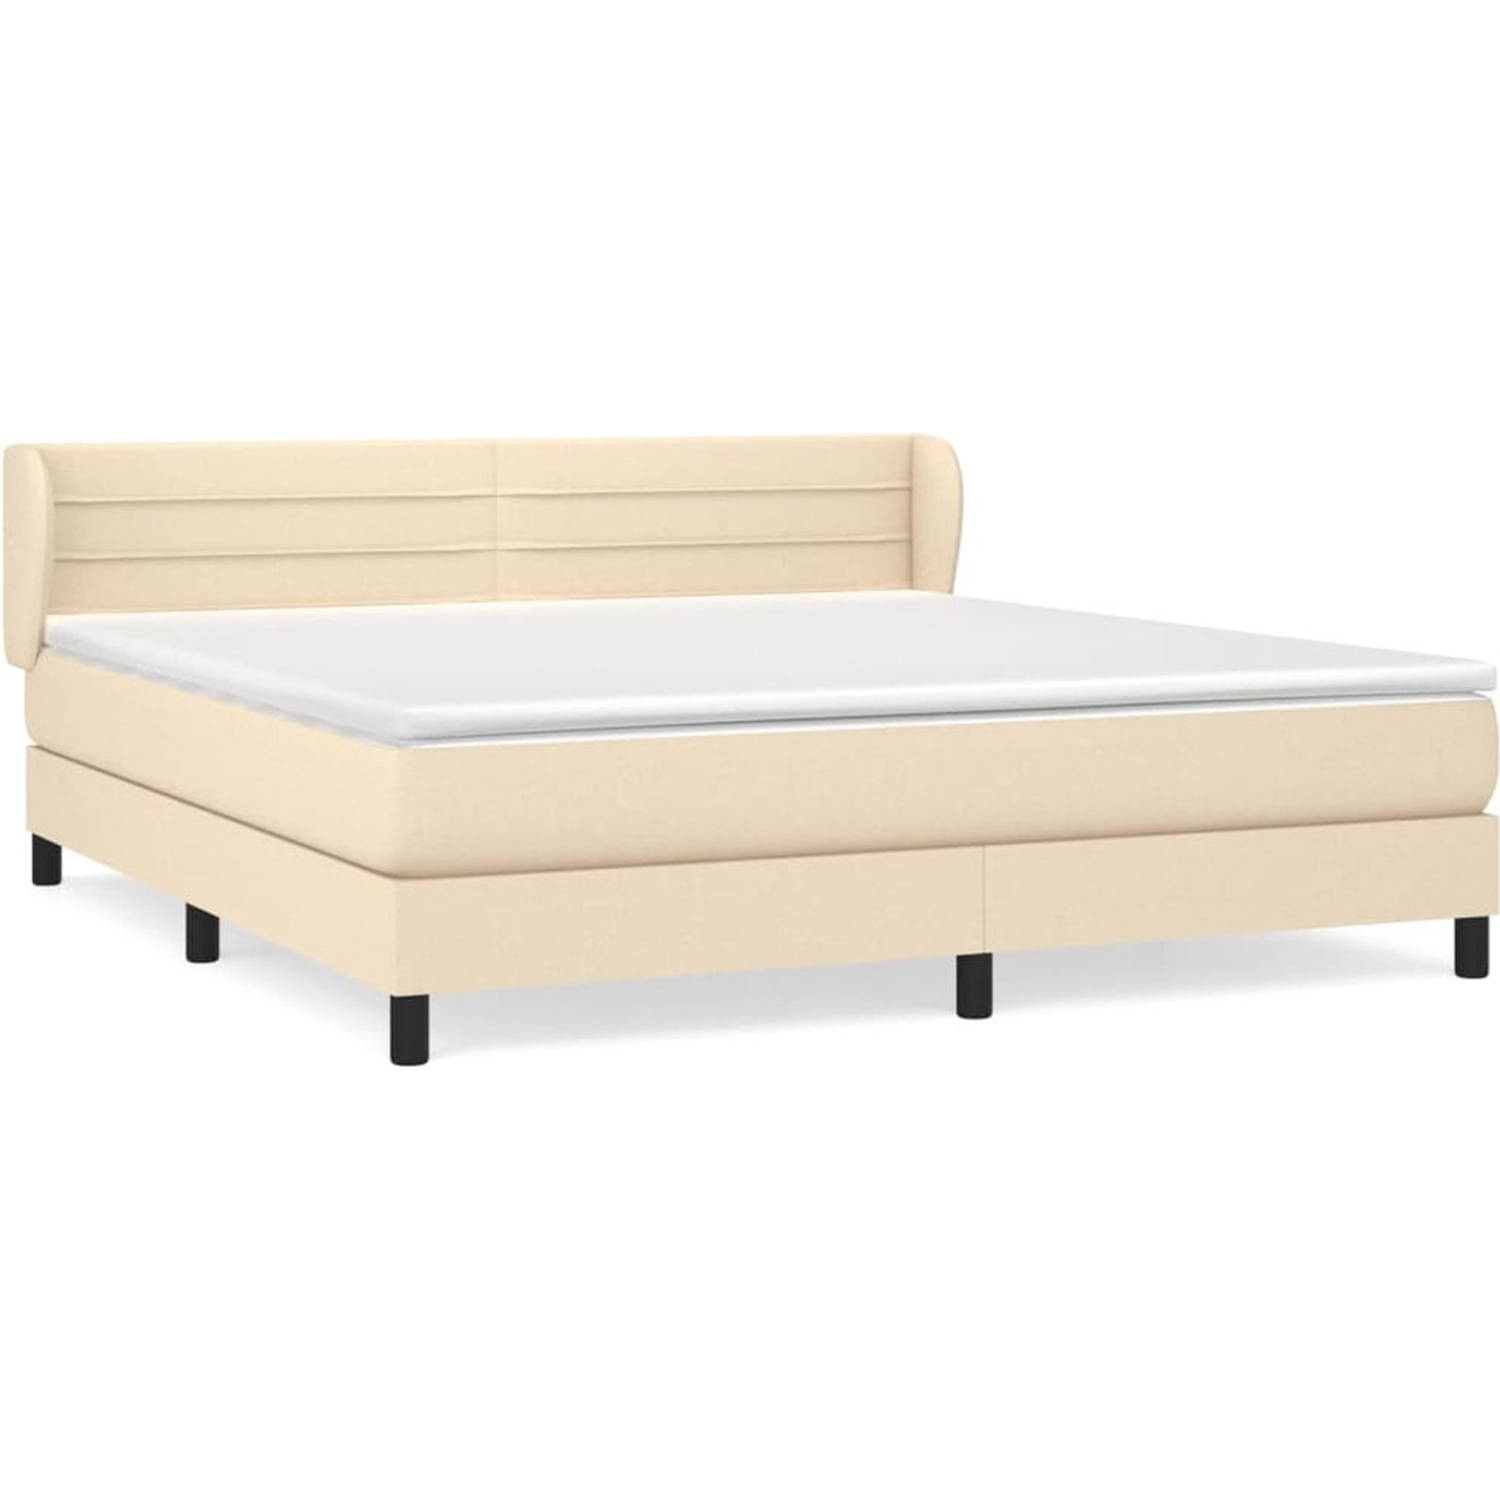 The Living Store Boxspringbed - Rustgevend - Bed - 180 x 200 - Ken- Duurzaam materiaal